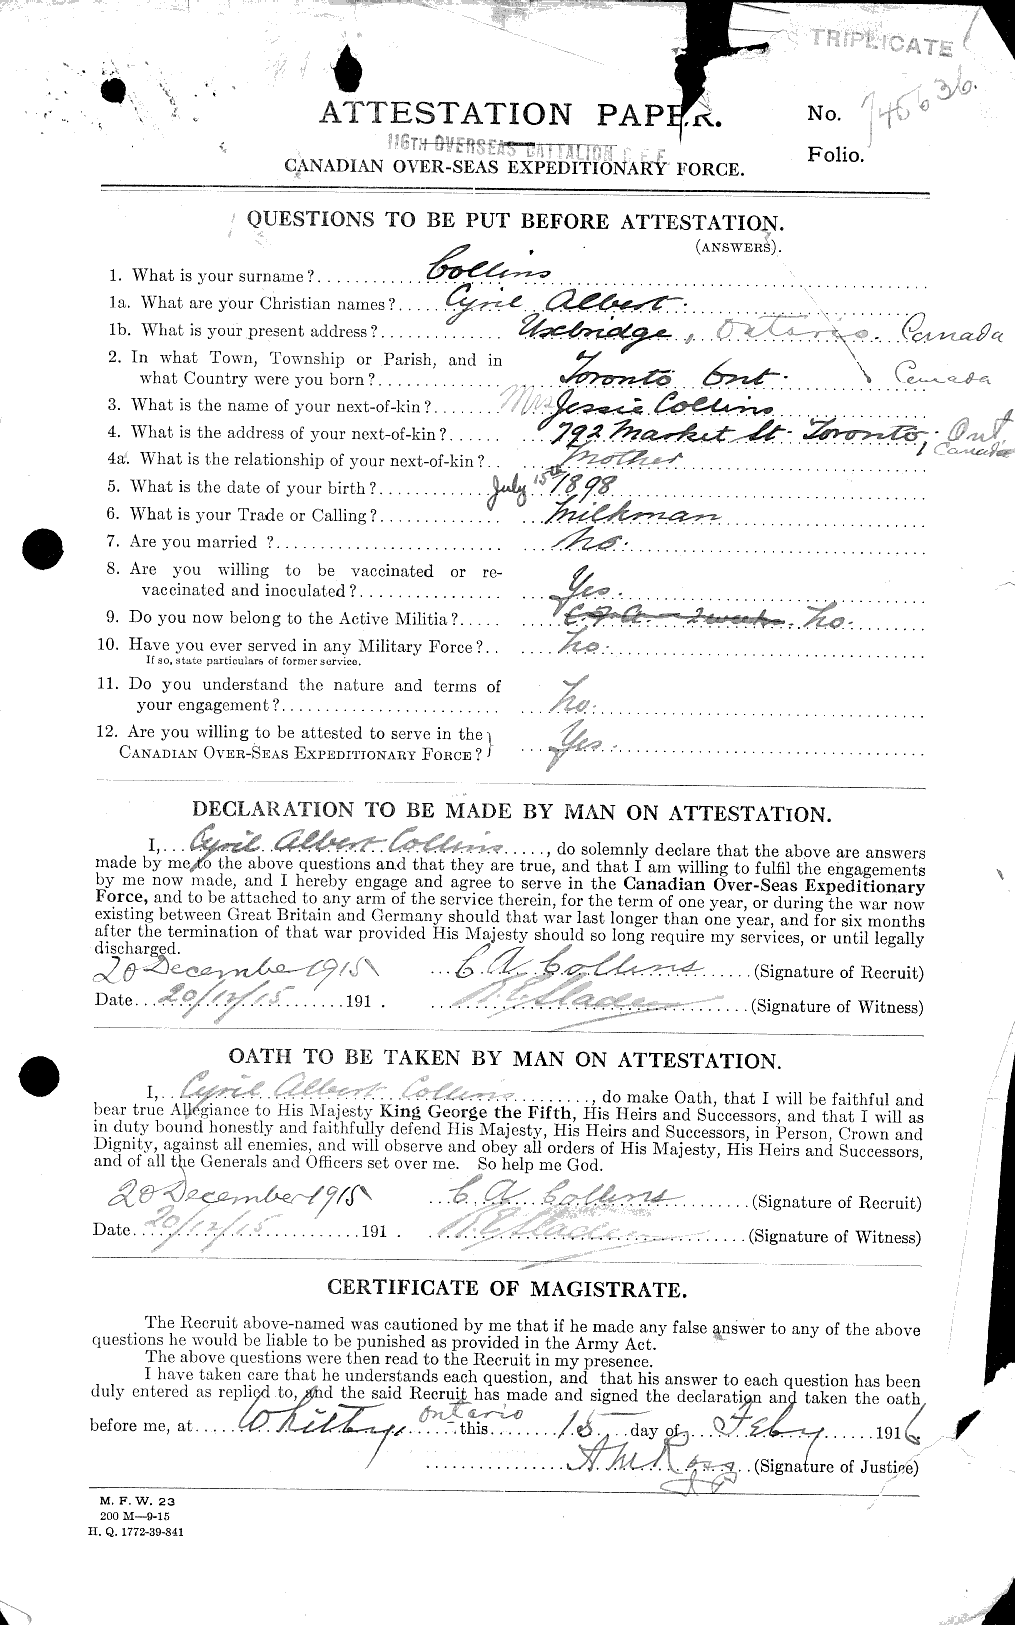 Personnel Records of the First World War - CEF 029060a